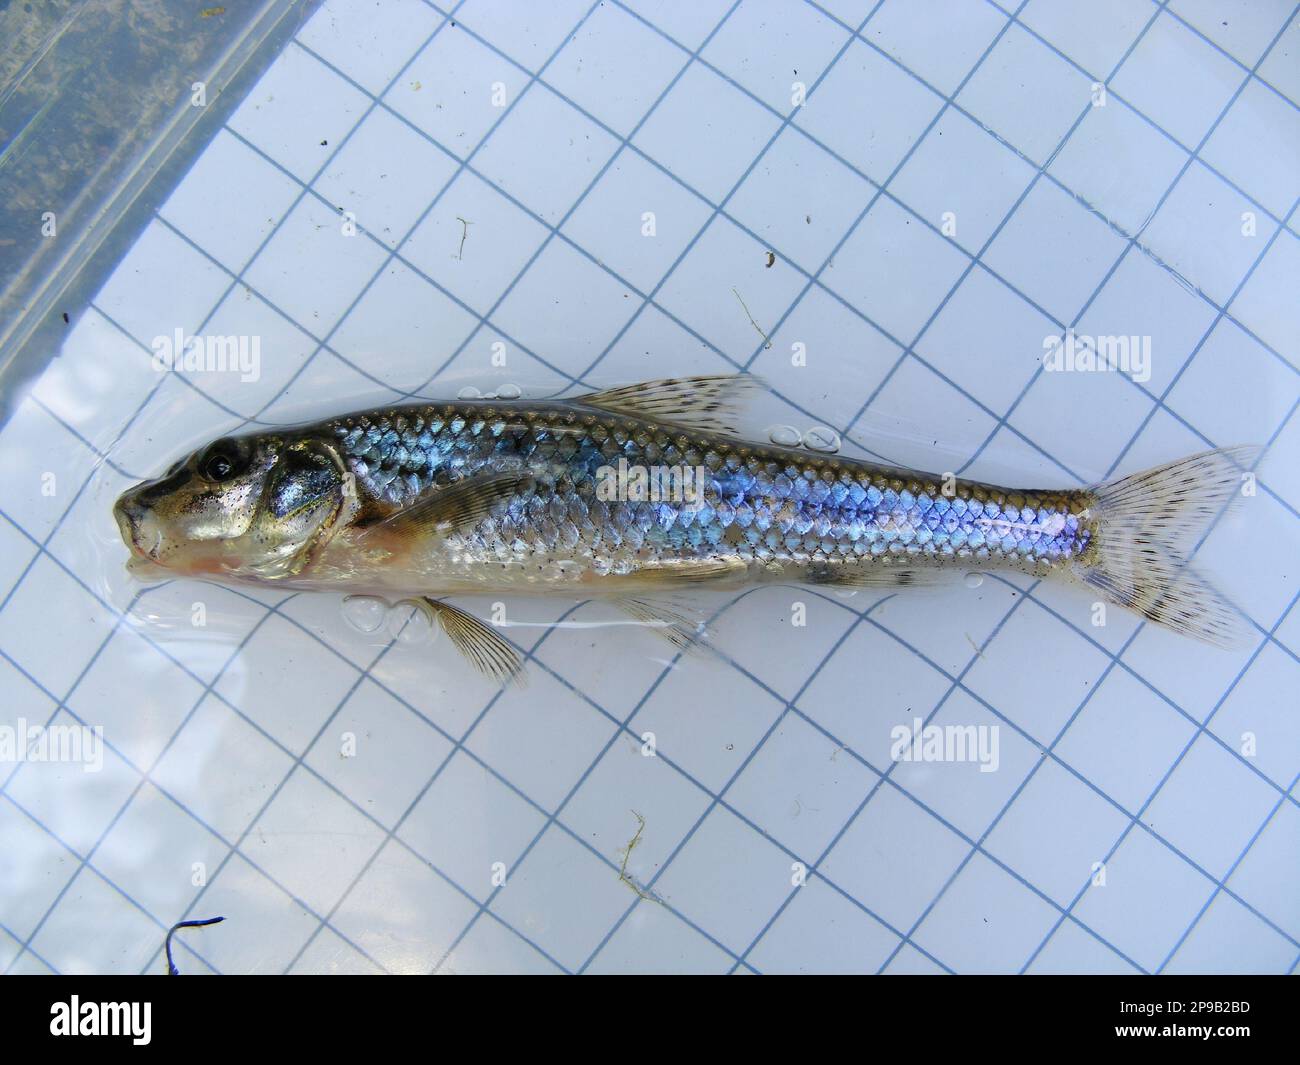 Gobio gobio, or the gudgeon, is a species of fish in the family Cyprinidae on the background of a 5 mm measurement grid. Ichthyology research. Stock Photo